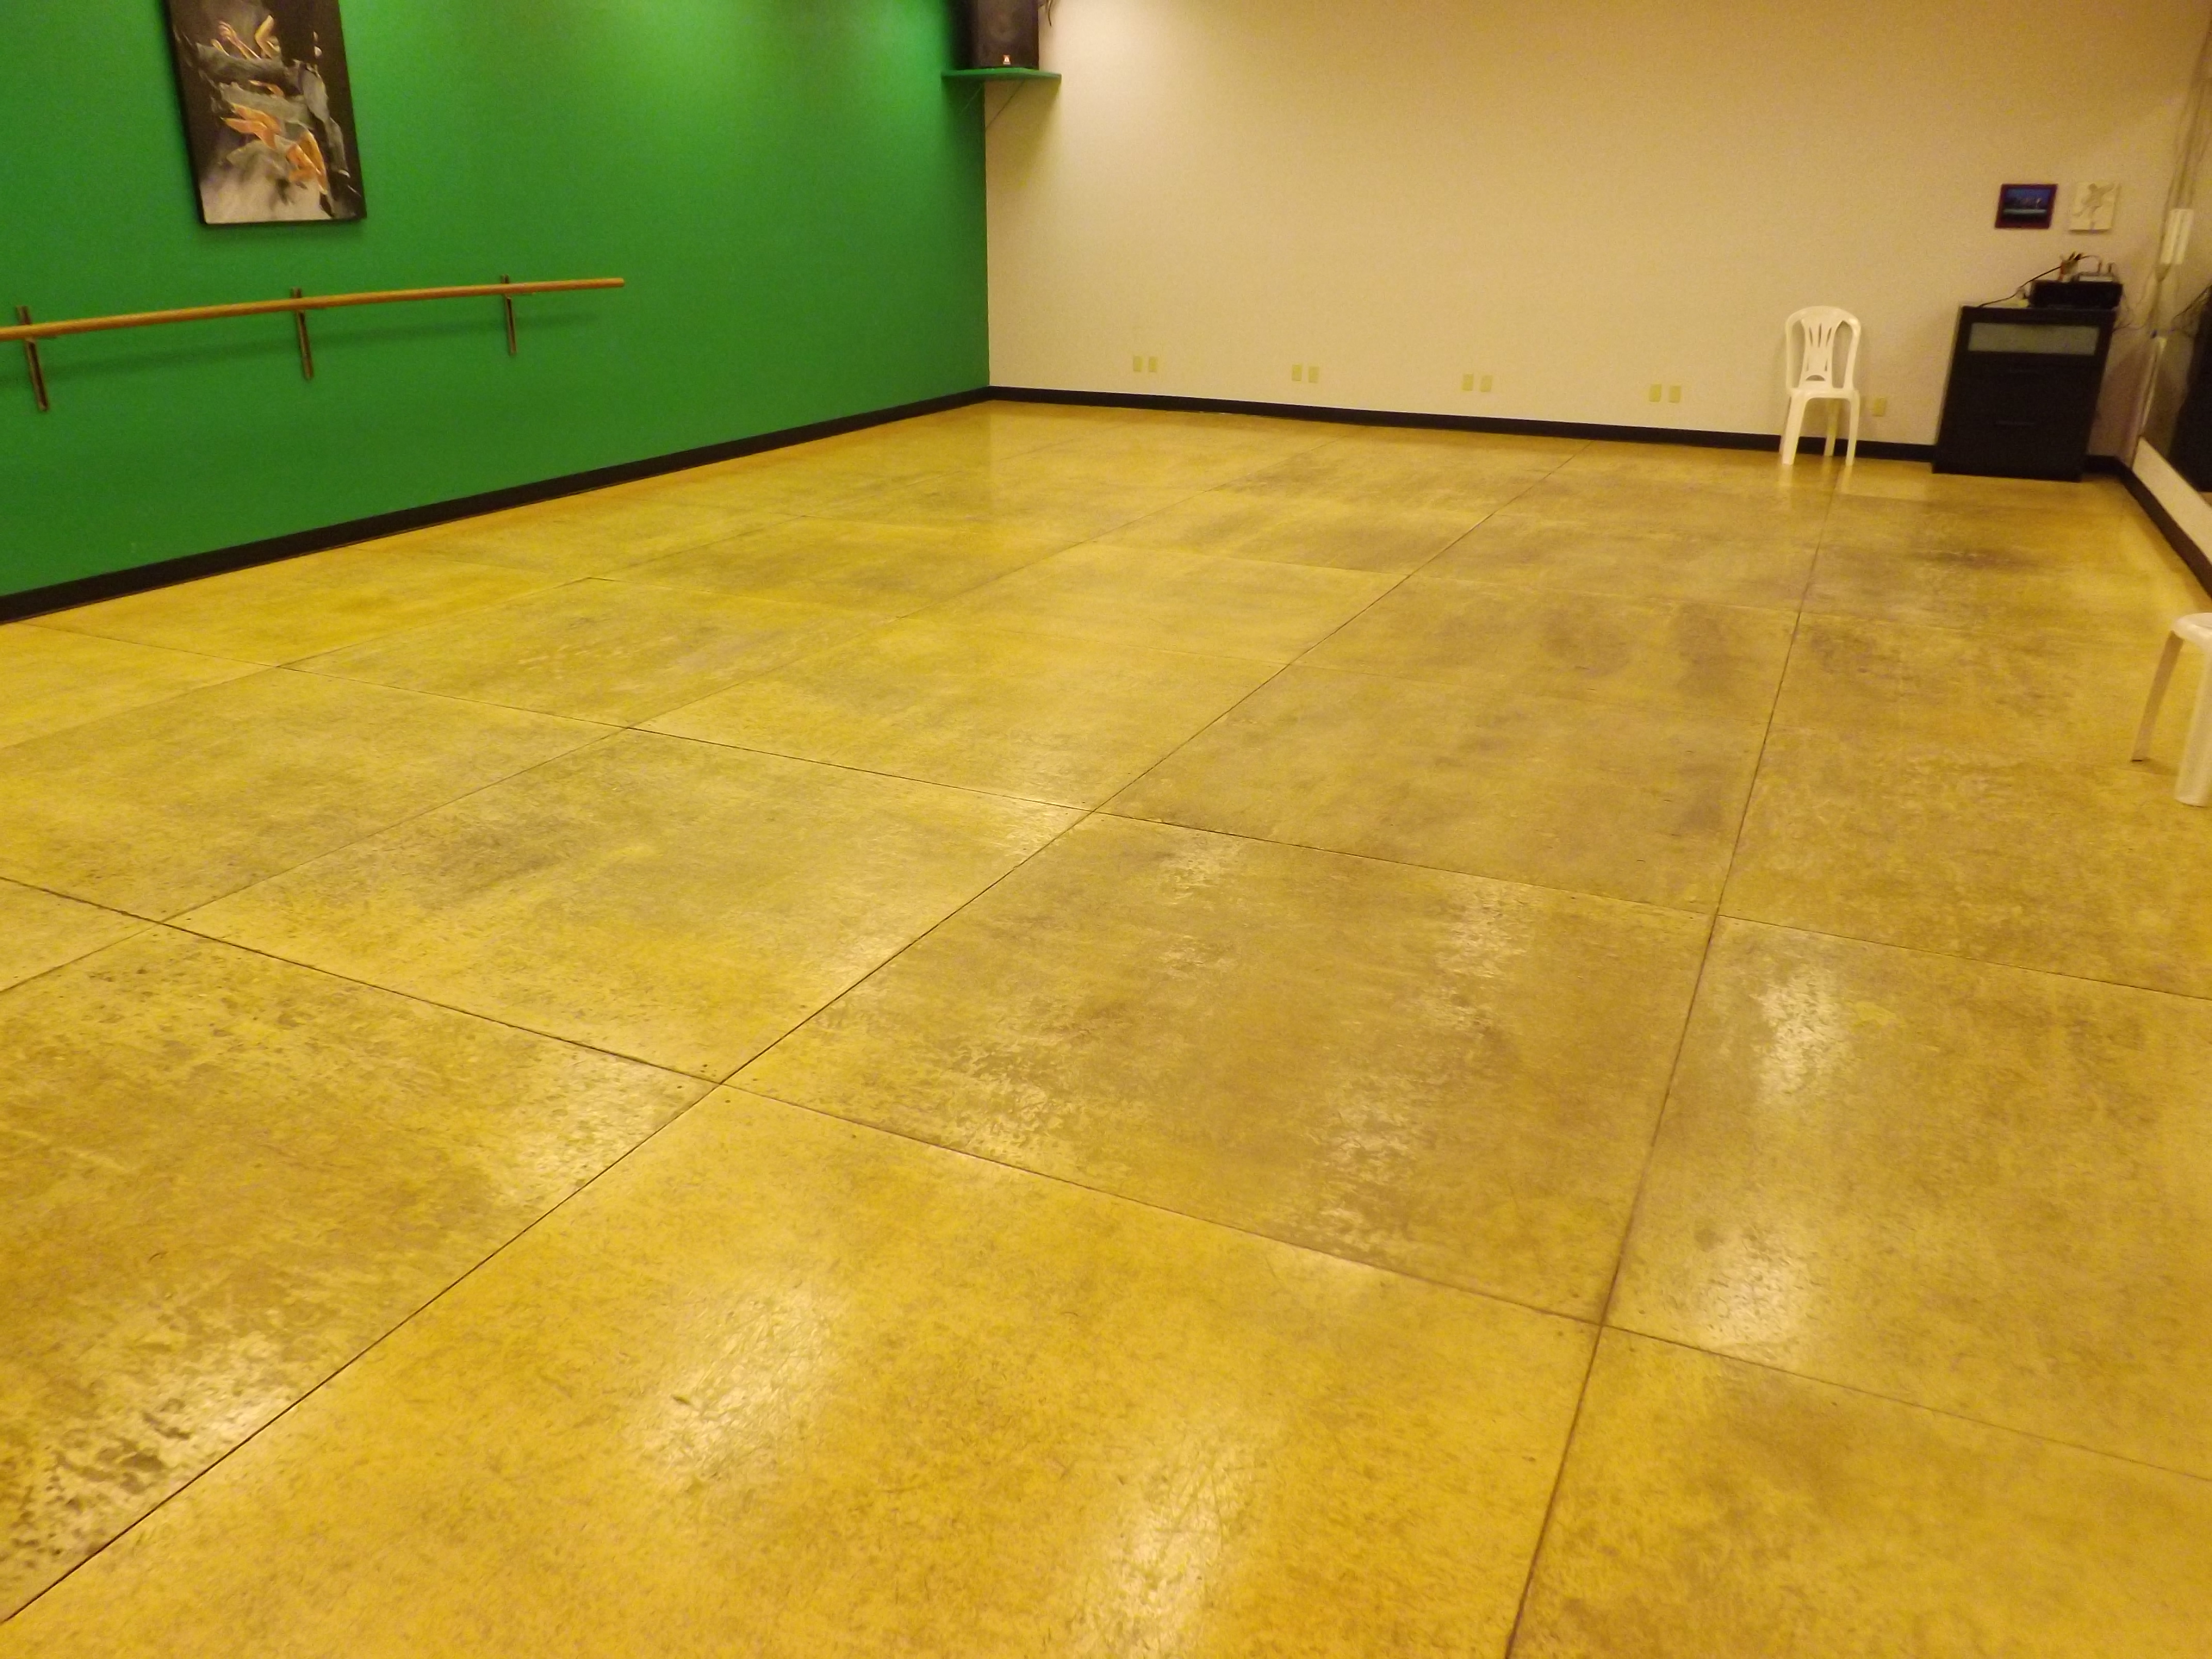 After NeverStrip Cleaning & New Surface Application